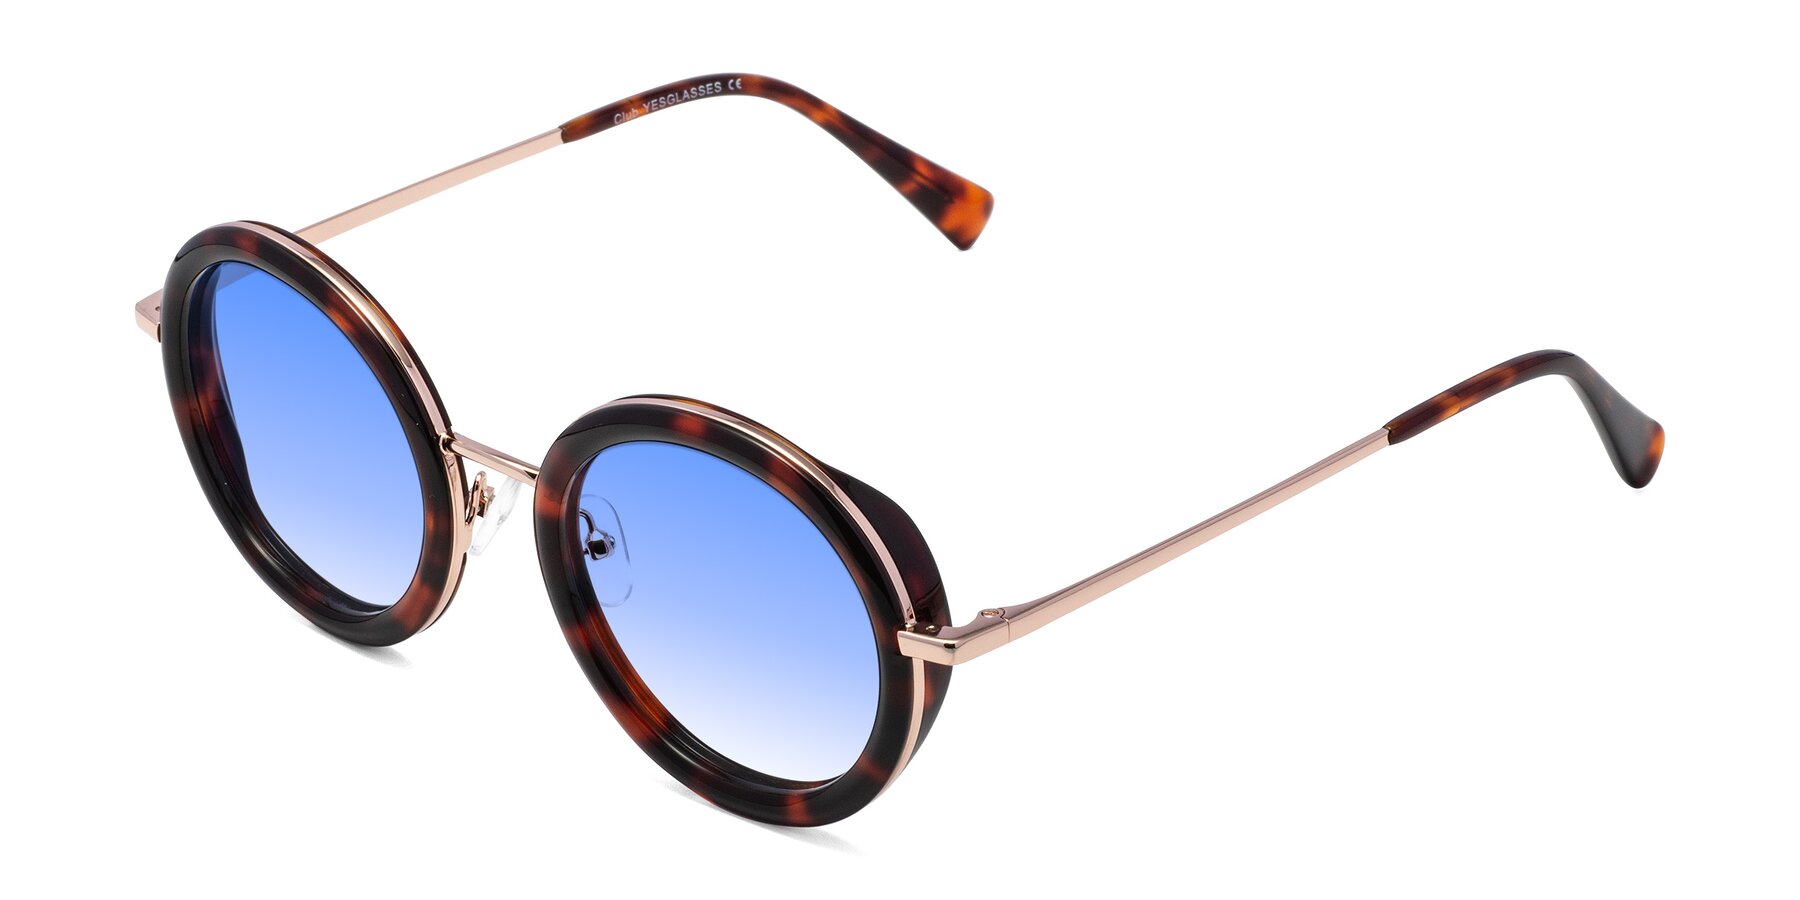 Angle of Club in Tortoise-Rose Gold with Blue Gradient Lenses